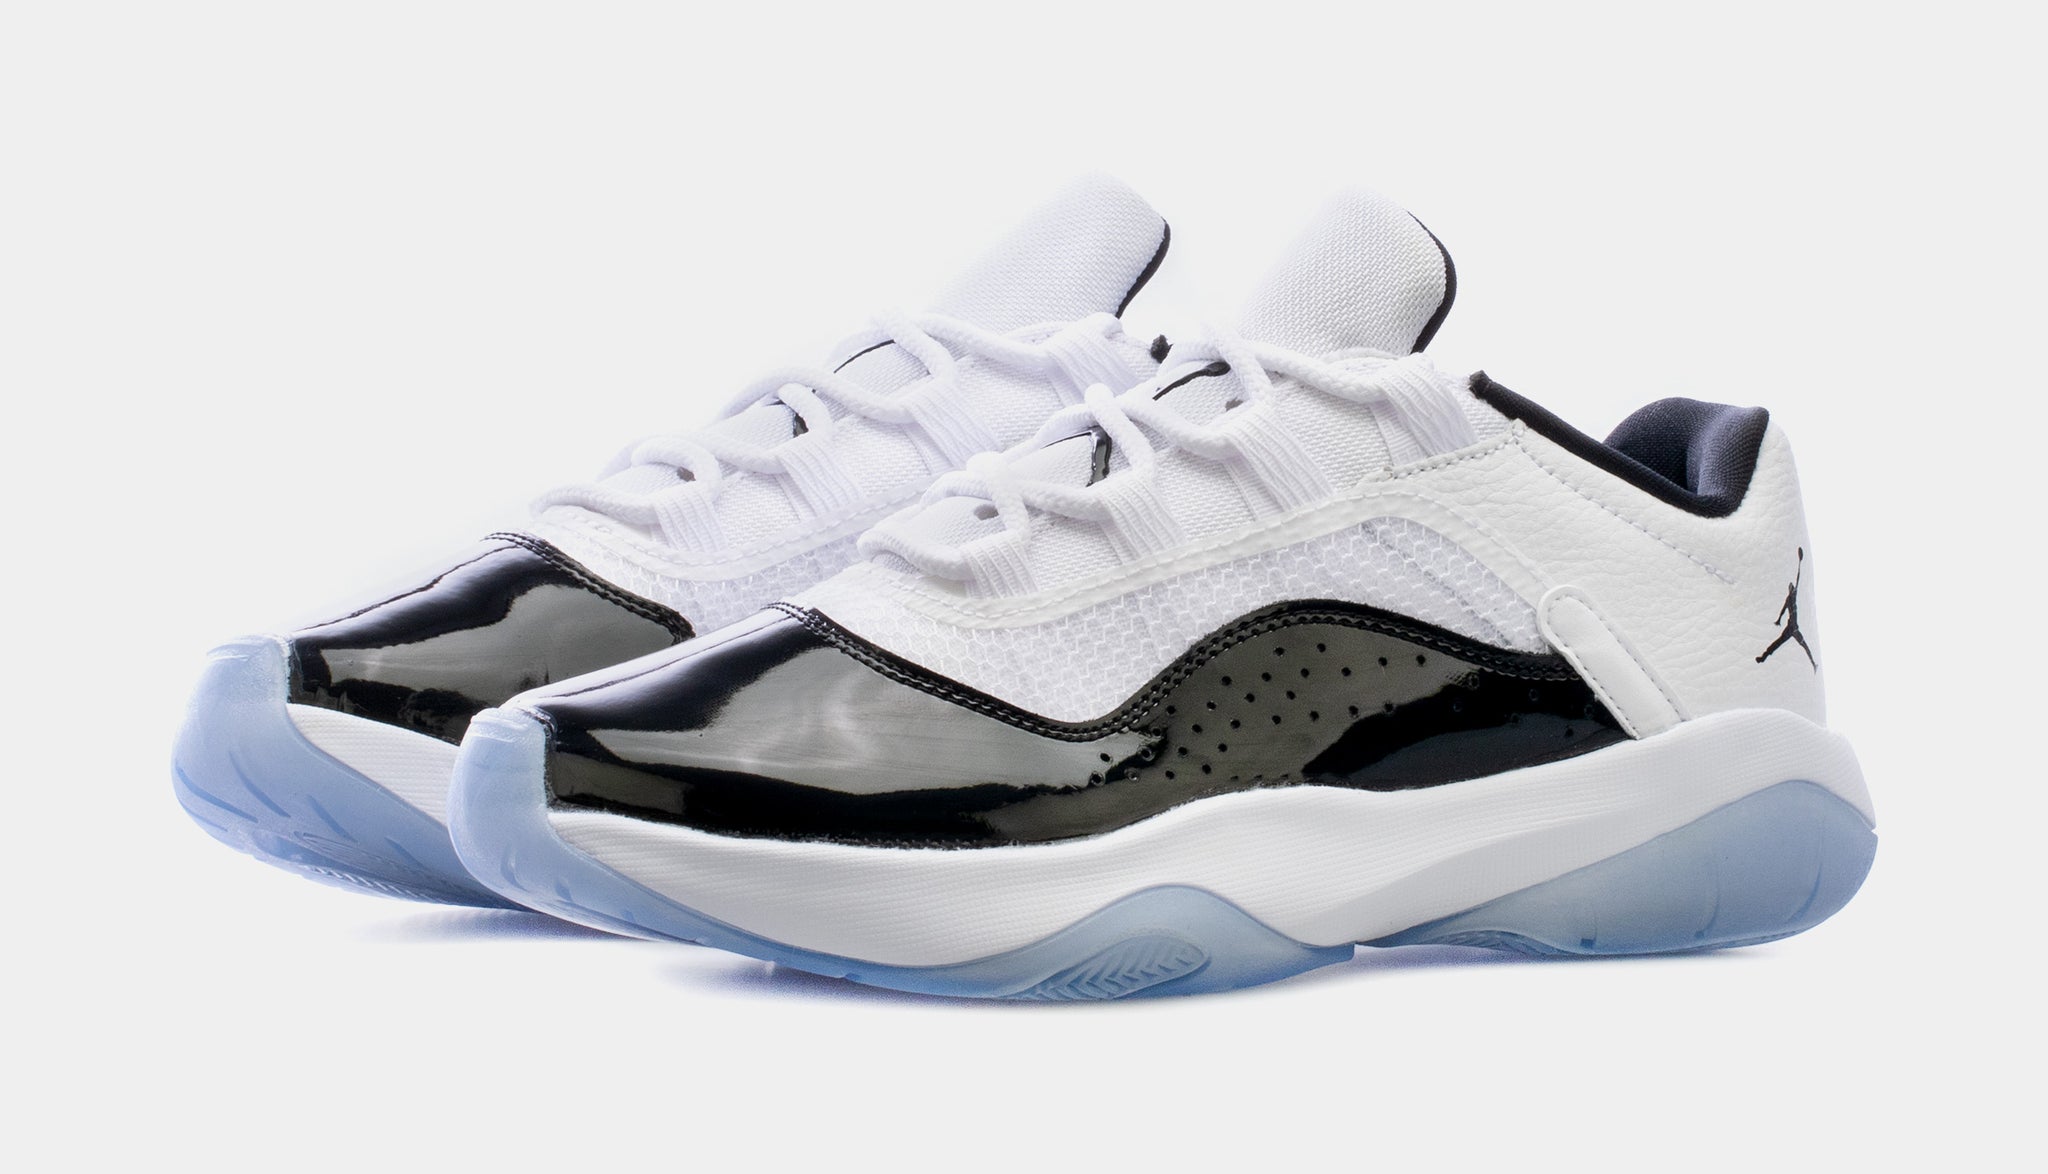 Jordan Air 11 Comfort Low Shoes in Grey Shoes Size:US 2Y Jimmy